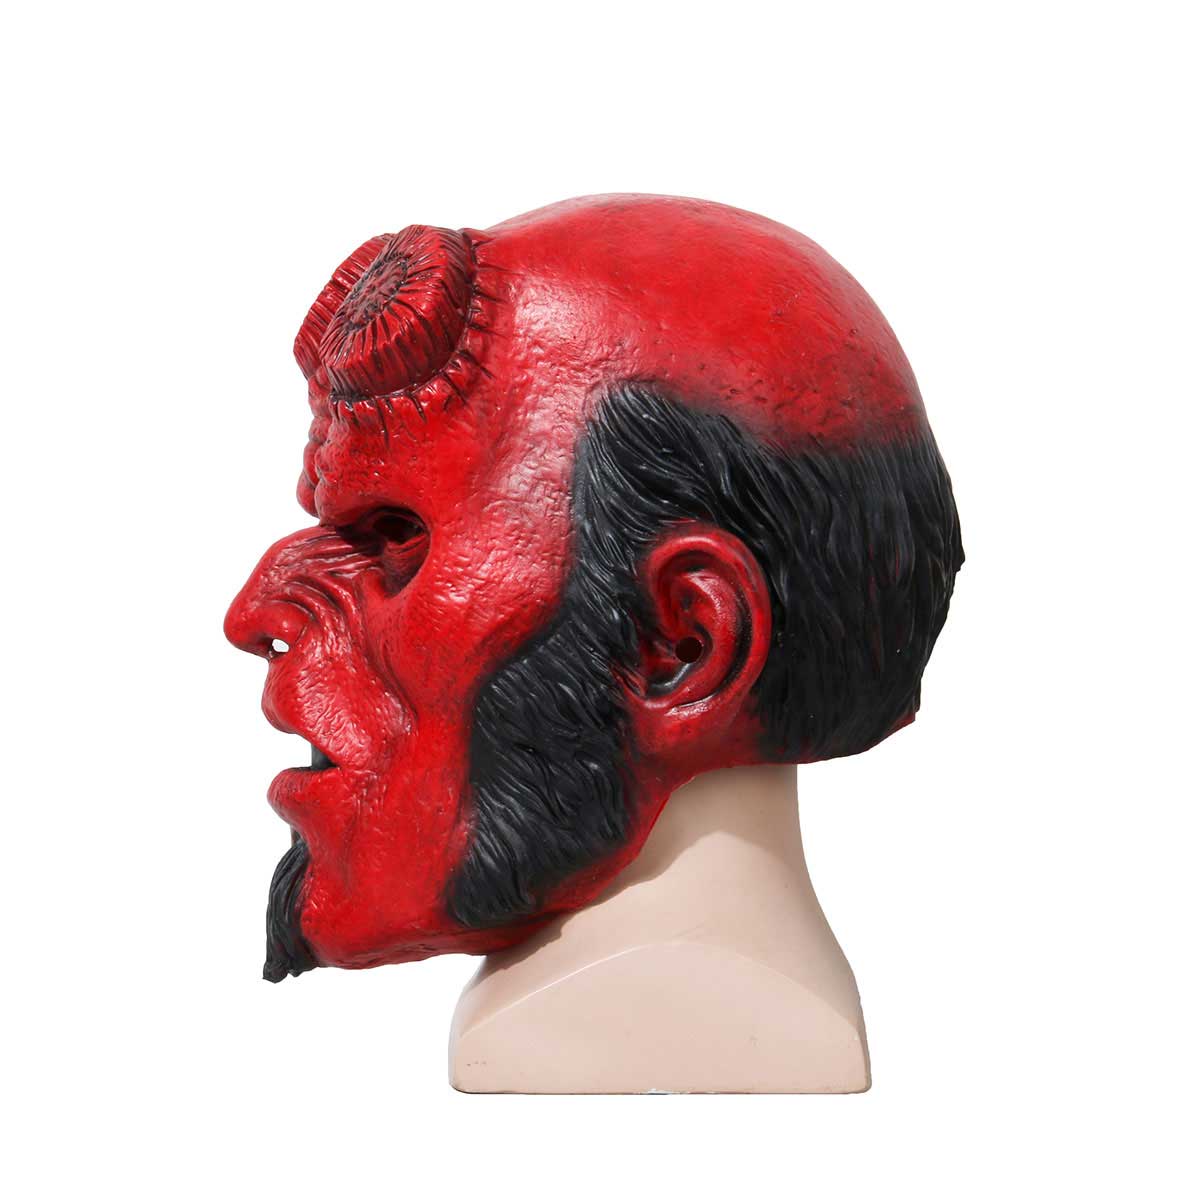 Masques d'Halloween Enfer Baron latex Masque Party cosplay